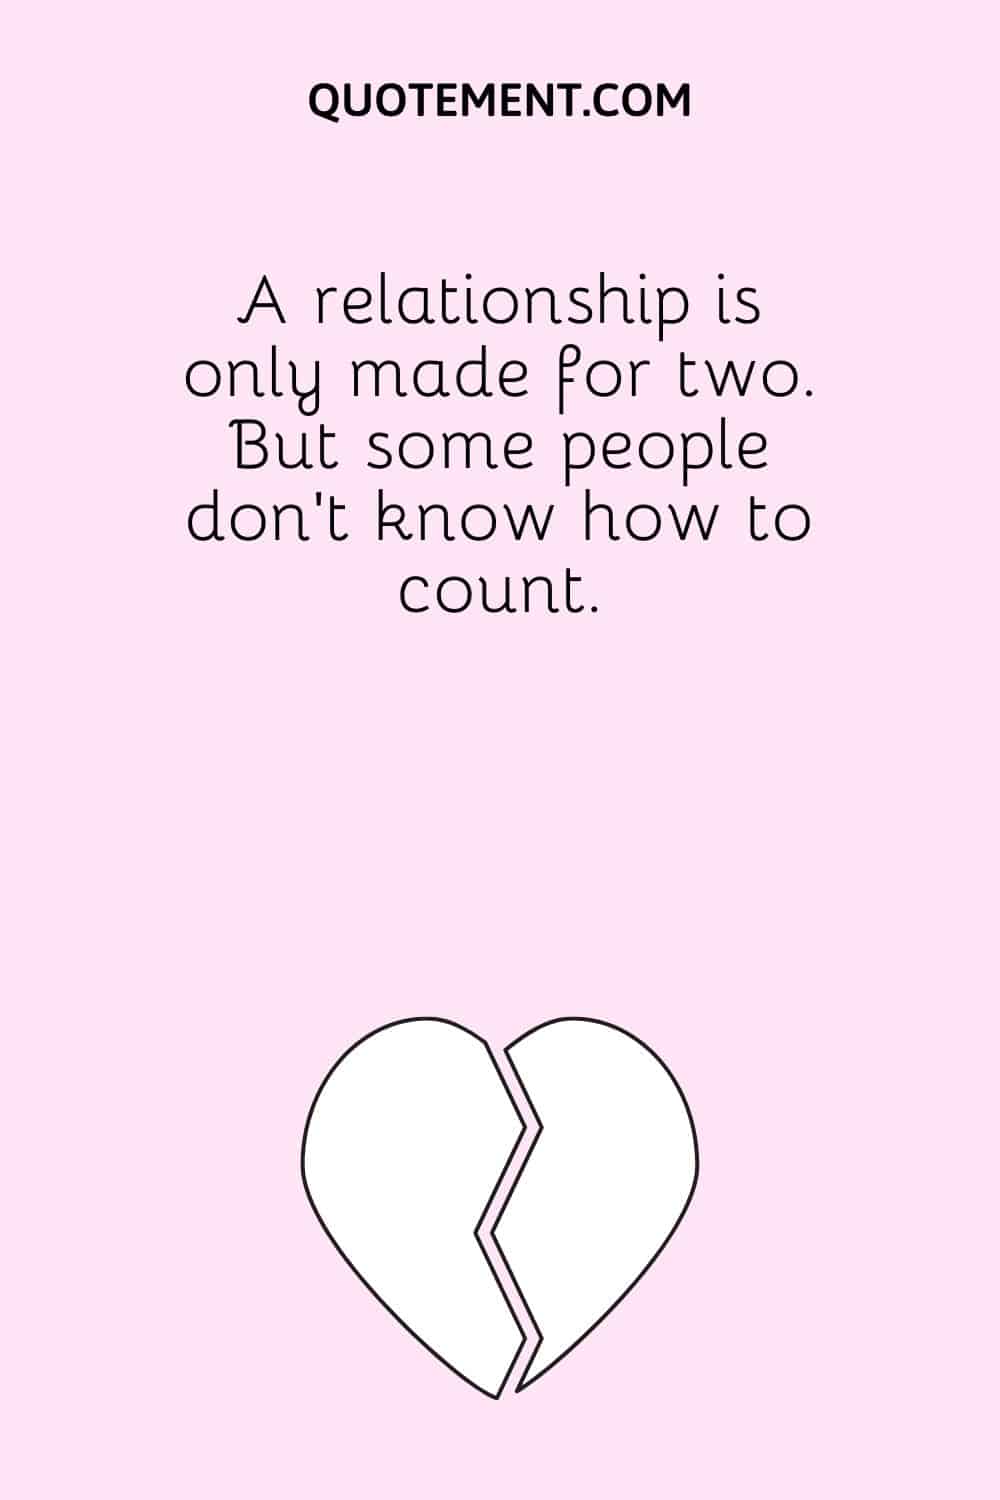 A relationship is only made for two. But some people don’t know how to count.